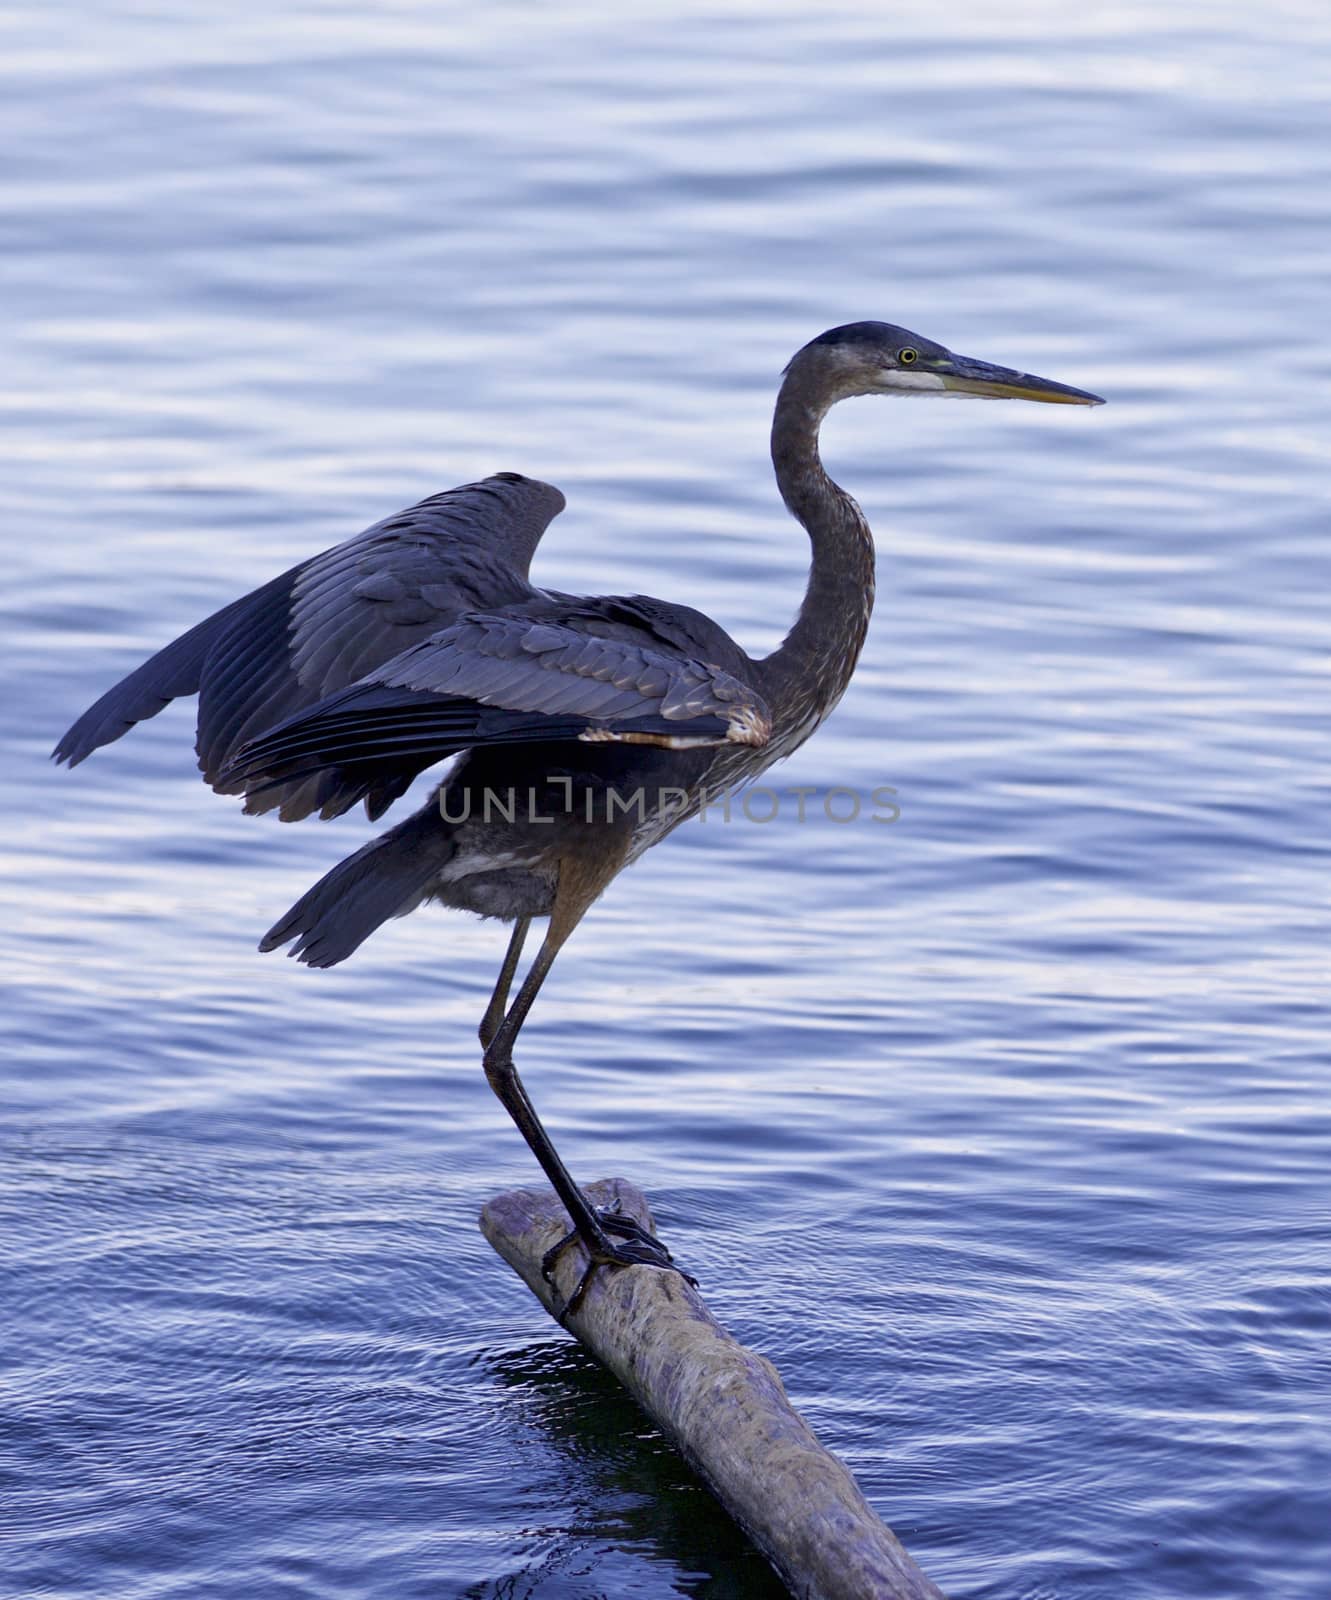 Beautiful photo of a great blue heron standing on a log in the lake